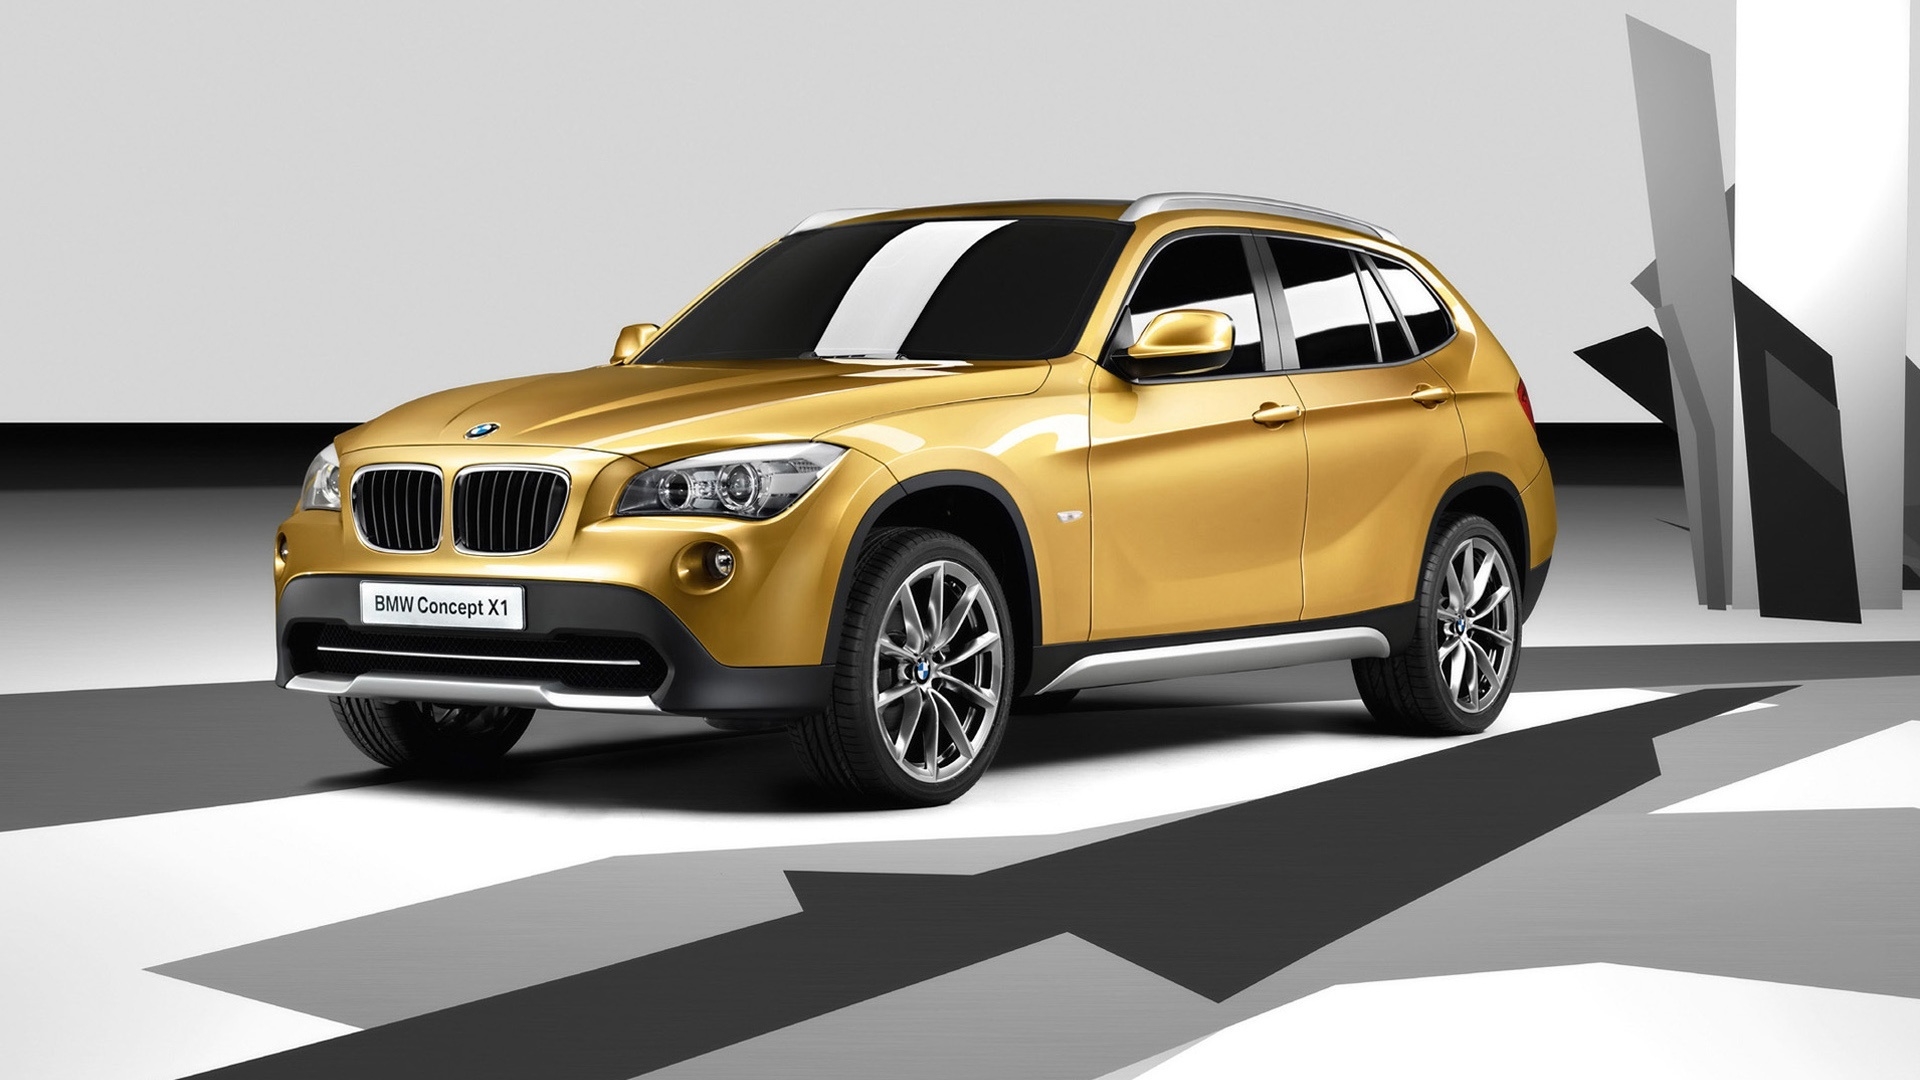 BMW Concept X1 2008 for 1920 x 1080 HDTV 1080p resolution